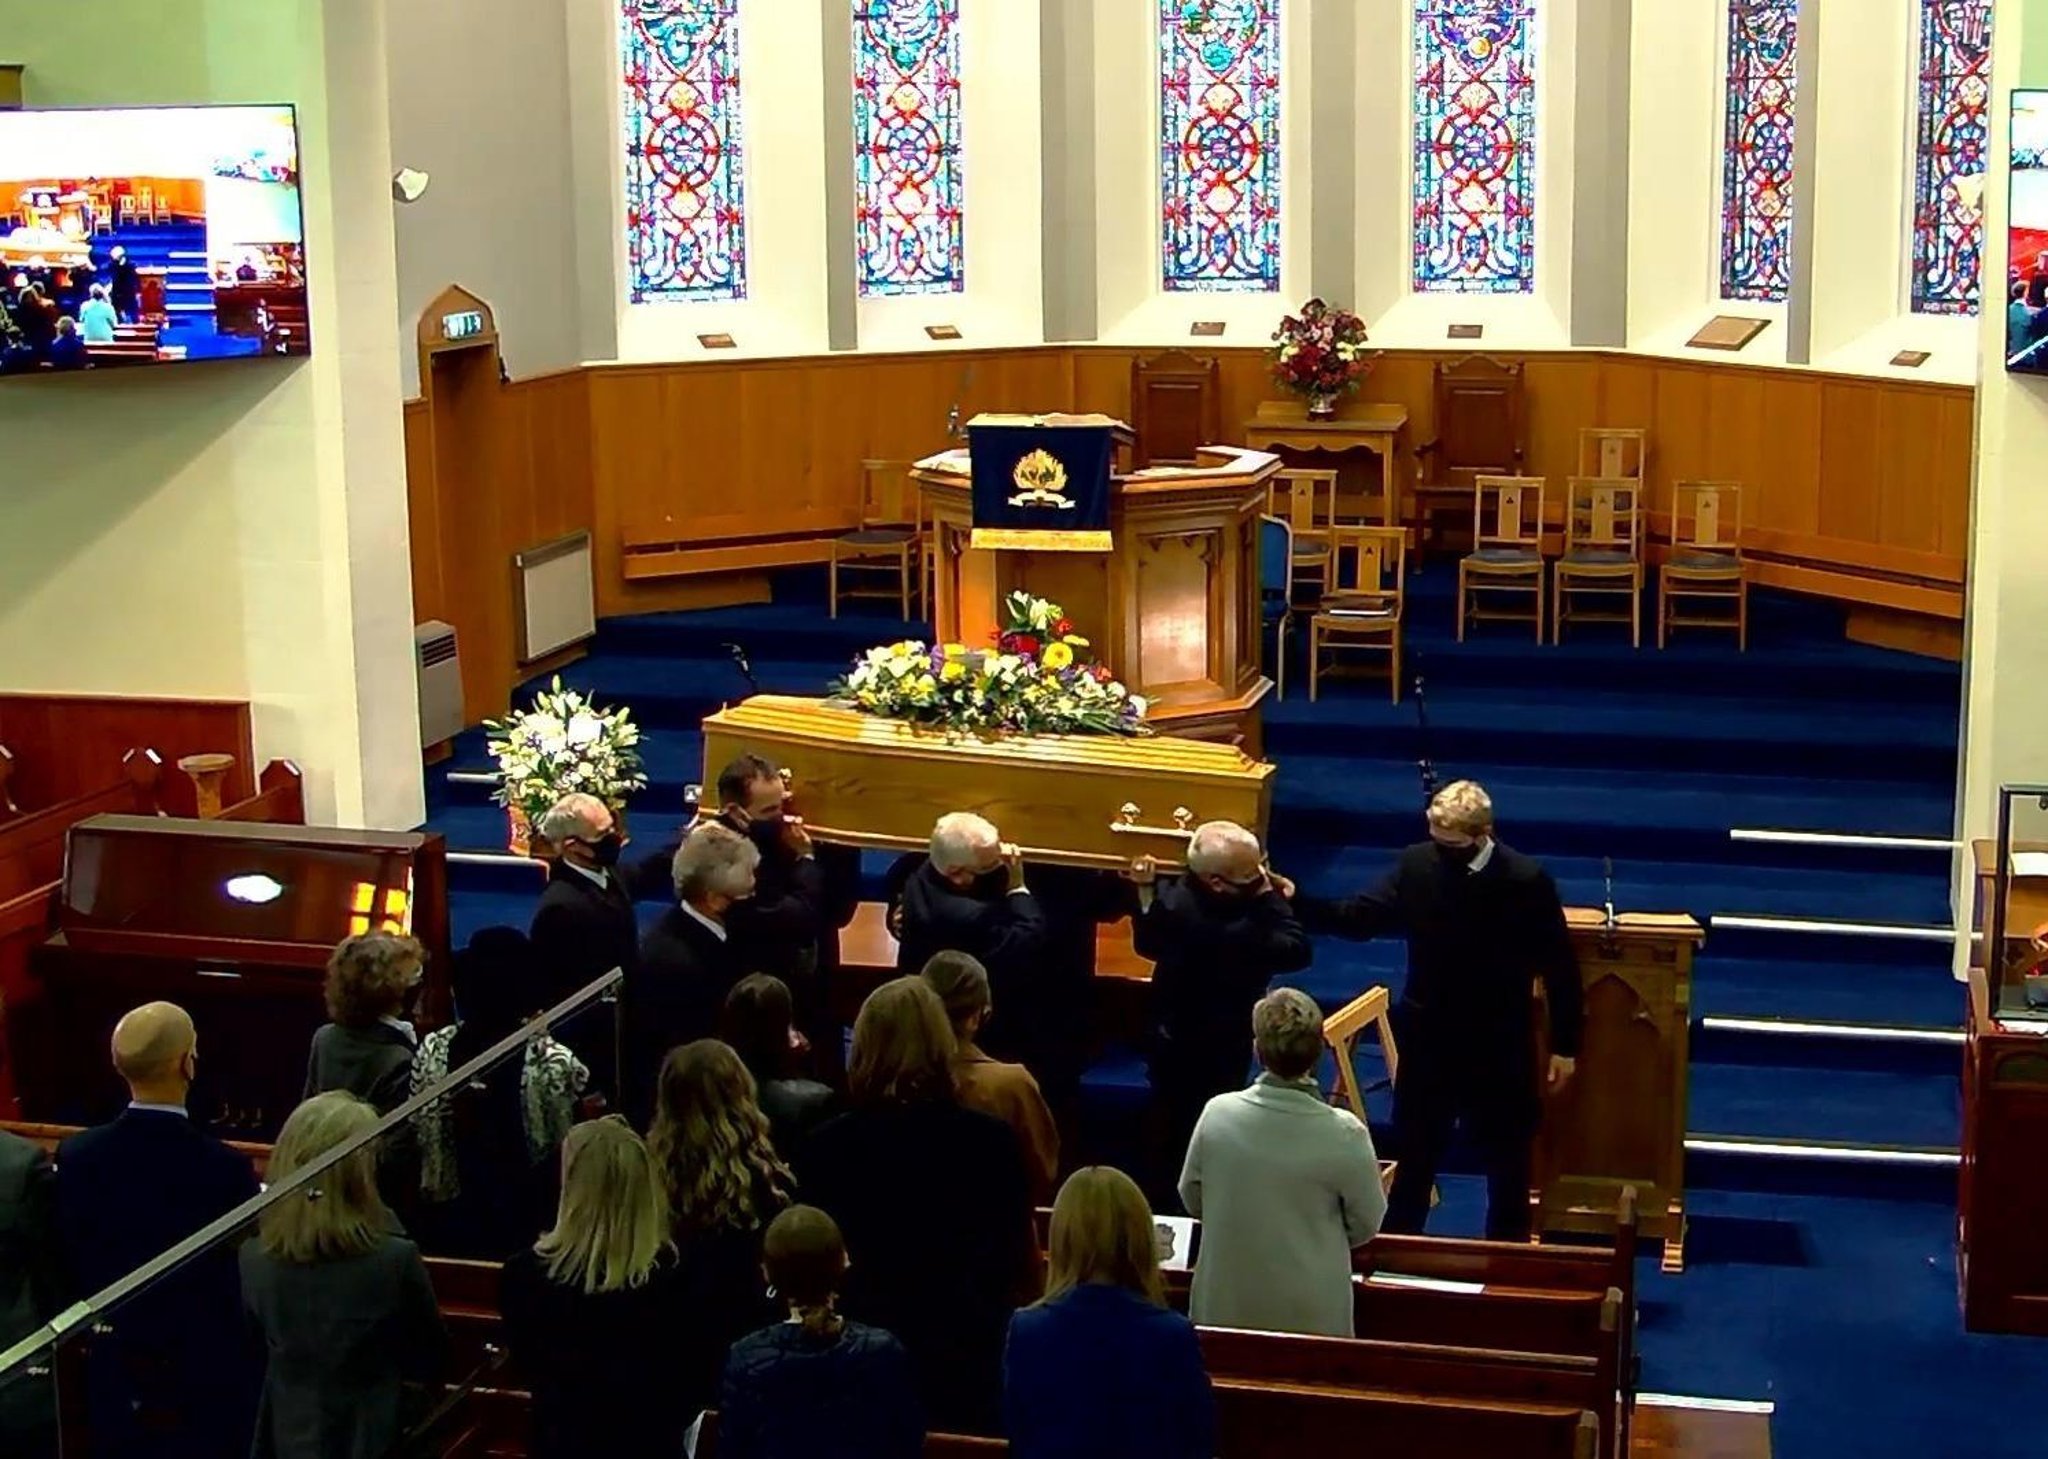 Ex Moderator S Funeral When He Climbed The Pulpit A Holy Hush Fell Belfast News Letter